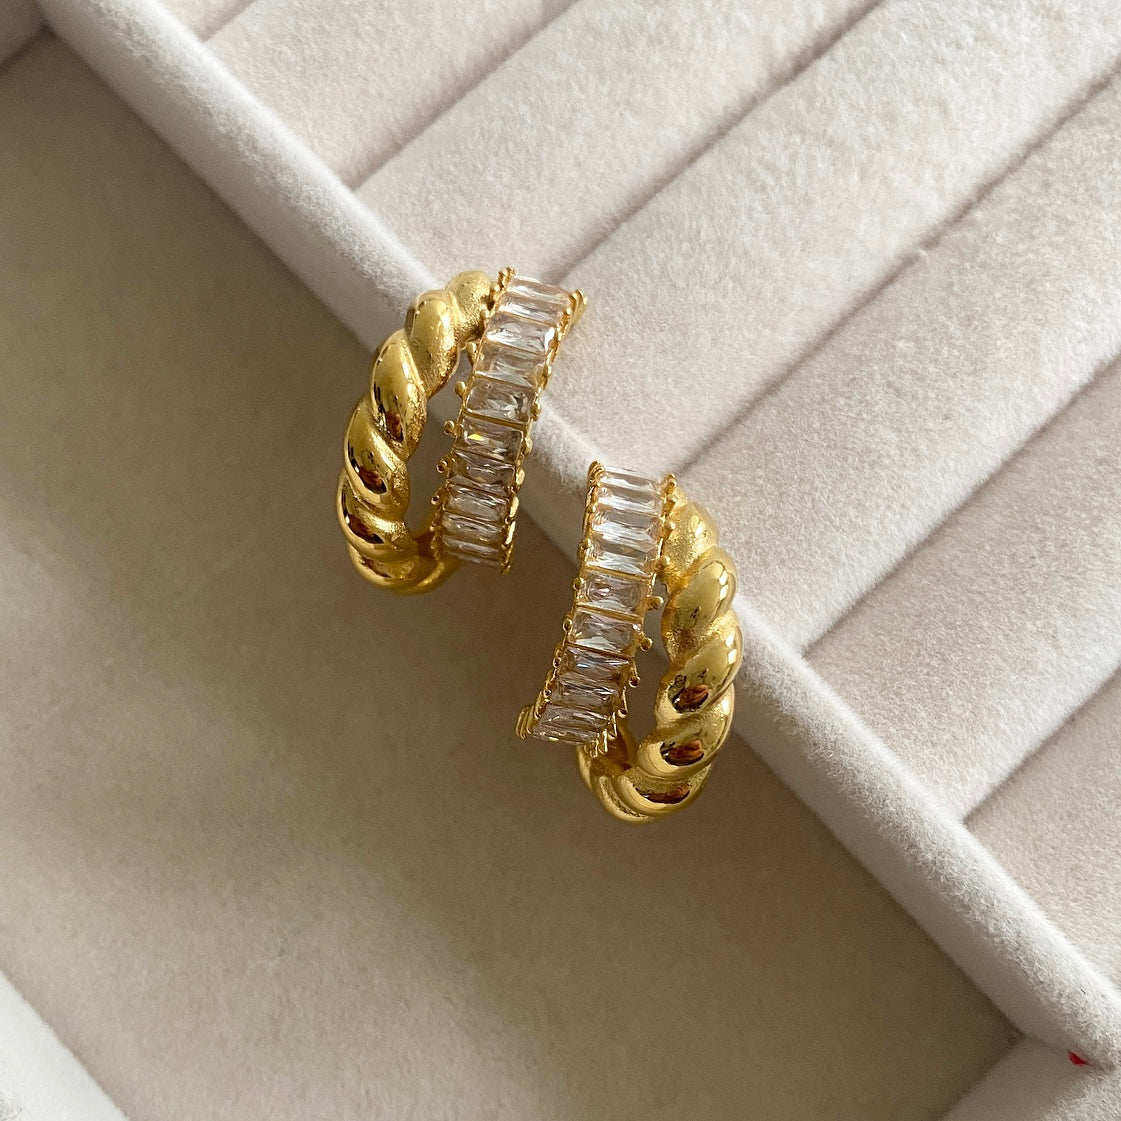 Add a touch of sparkle to your look with our Bonita Crystal Earrings. Made with 18k gold plated stainless steel, these hoops are not only durable but will take you from day to evening effortlessly. A must-have accessory for any style. Earring drop 2.5cm